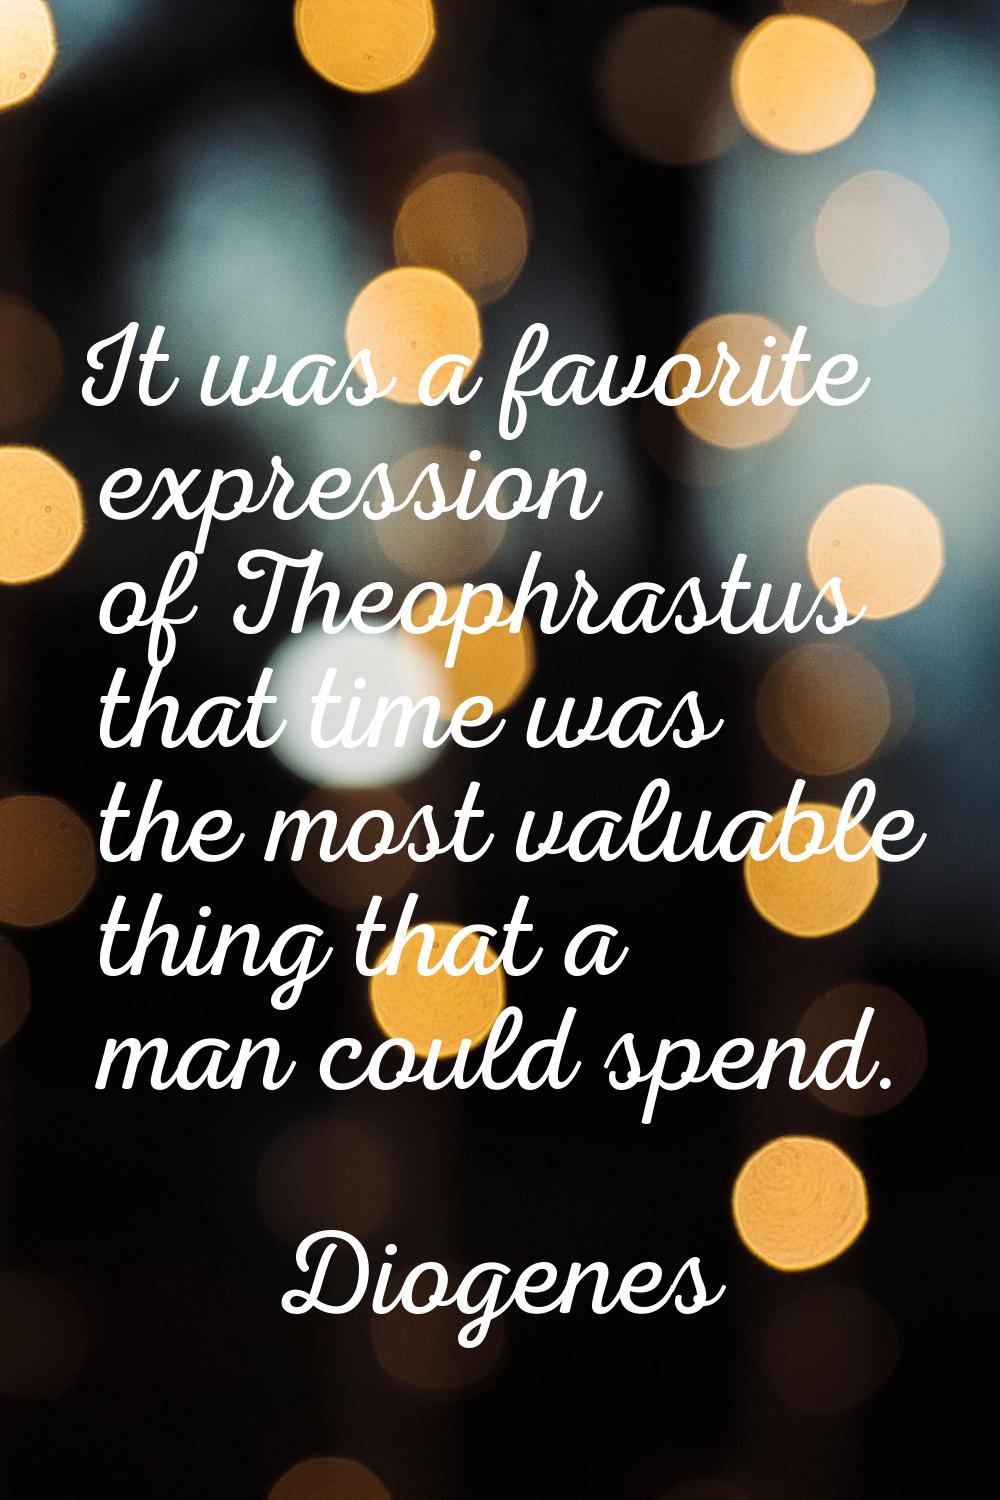 It was a favorite expression of Theophrastus that time was the most valuable thing that a man could